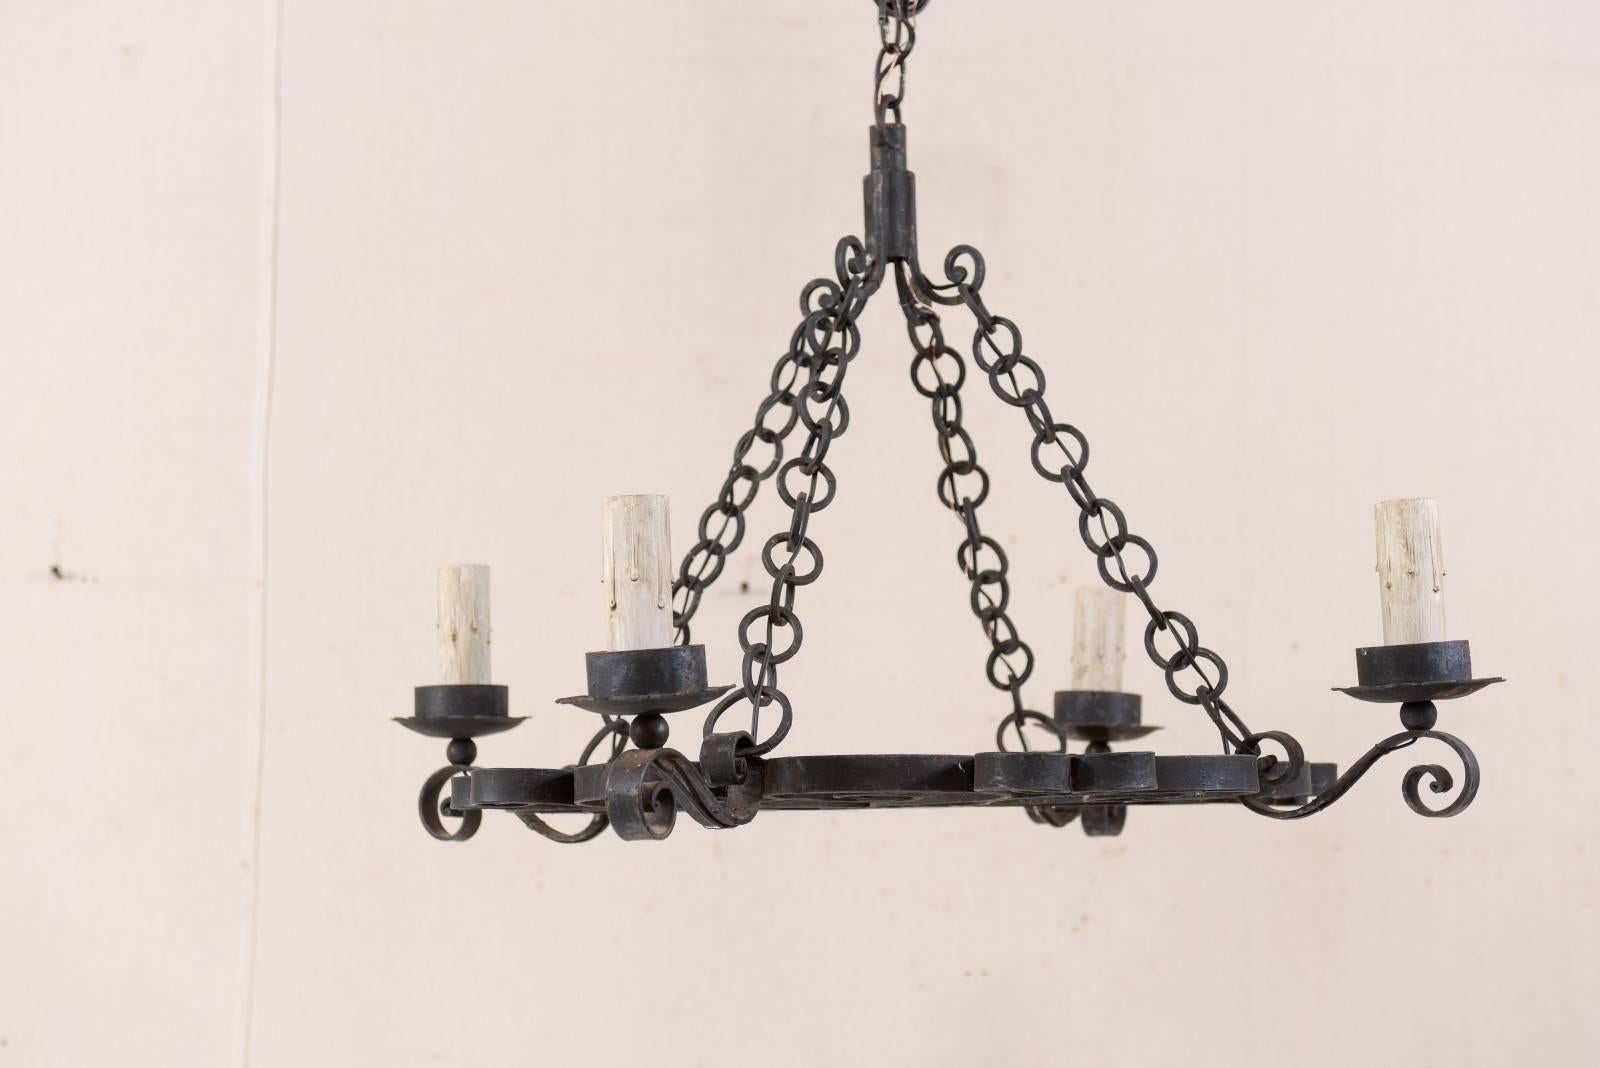 A French mid-20th century four-light forged-iron chandelier. This vintage French chandelier has an overall circular appearance, with gallery ring of this chandelier being comprised of a downward facing succession of sweetly scrolled heart-like